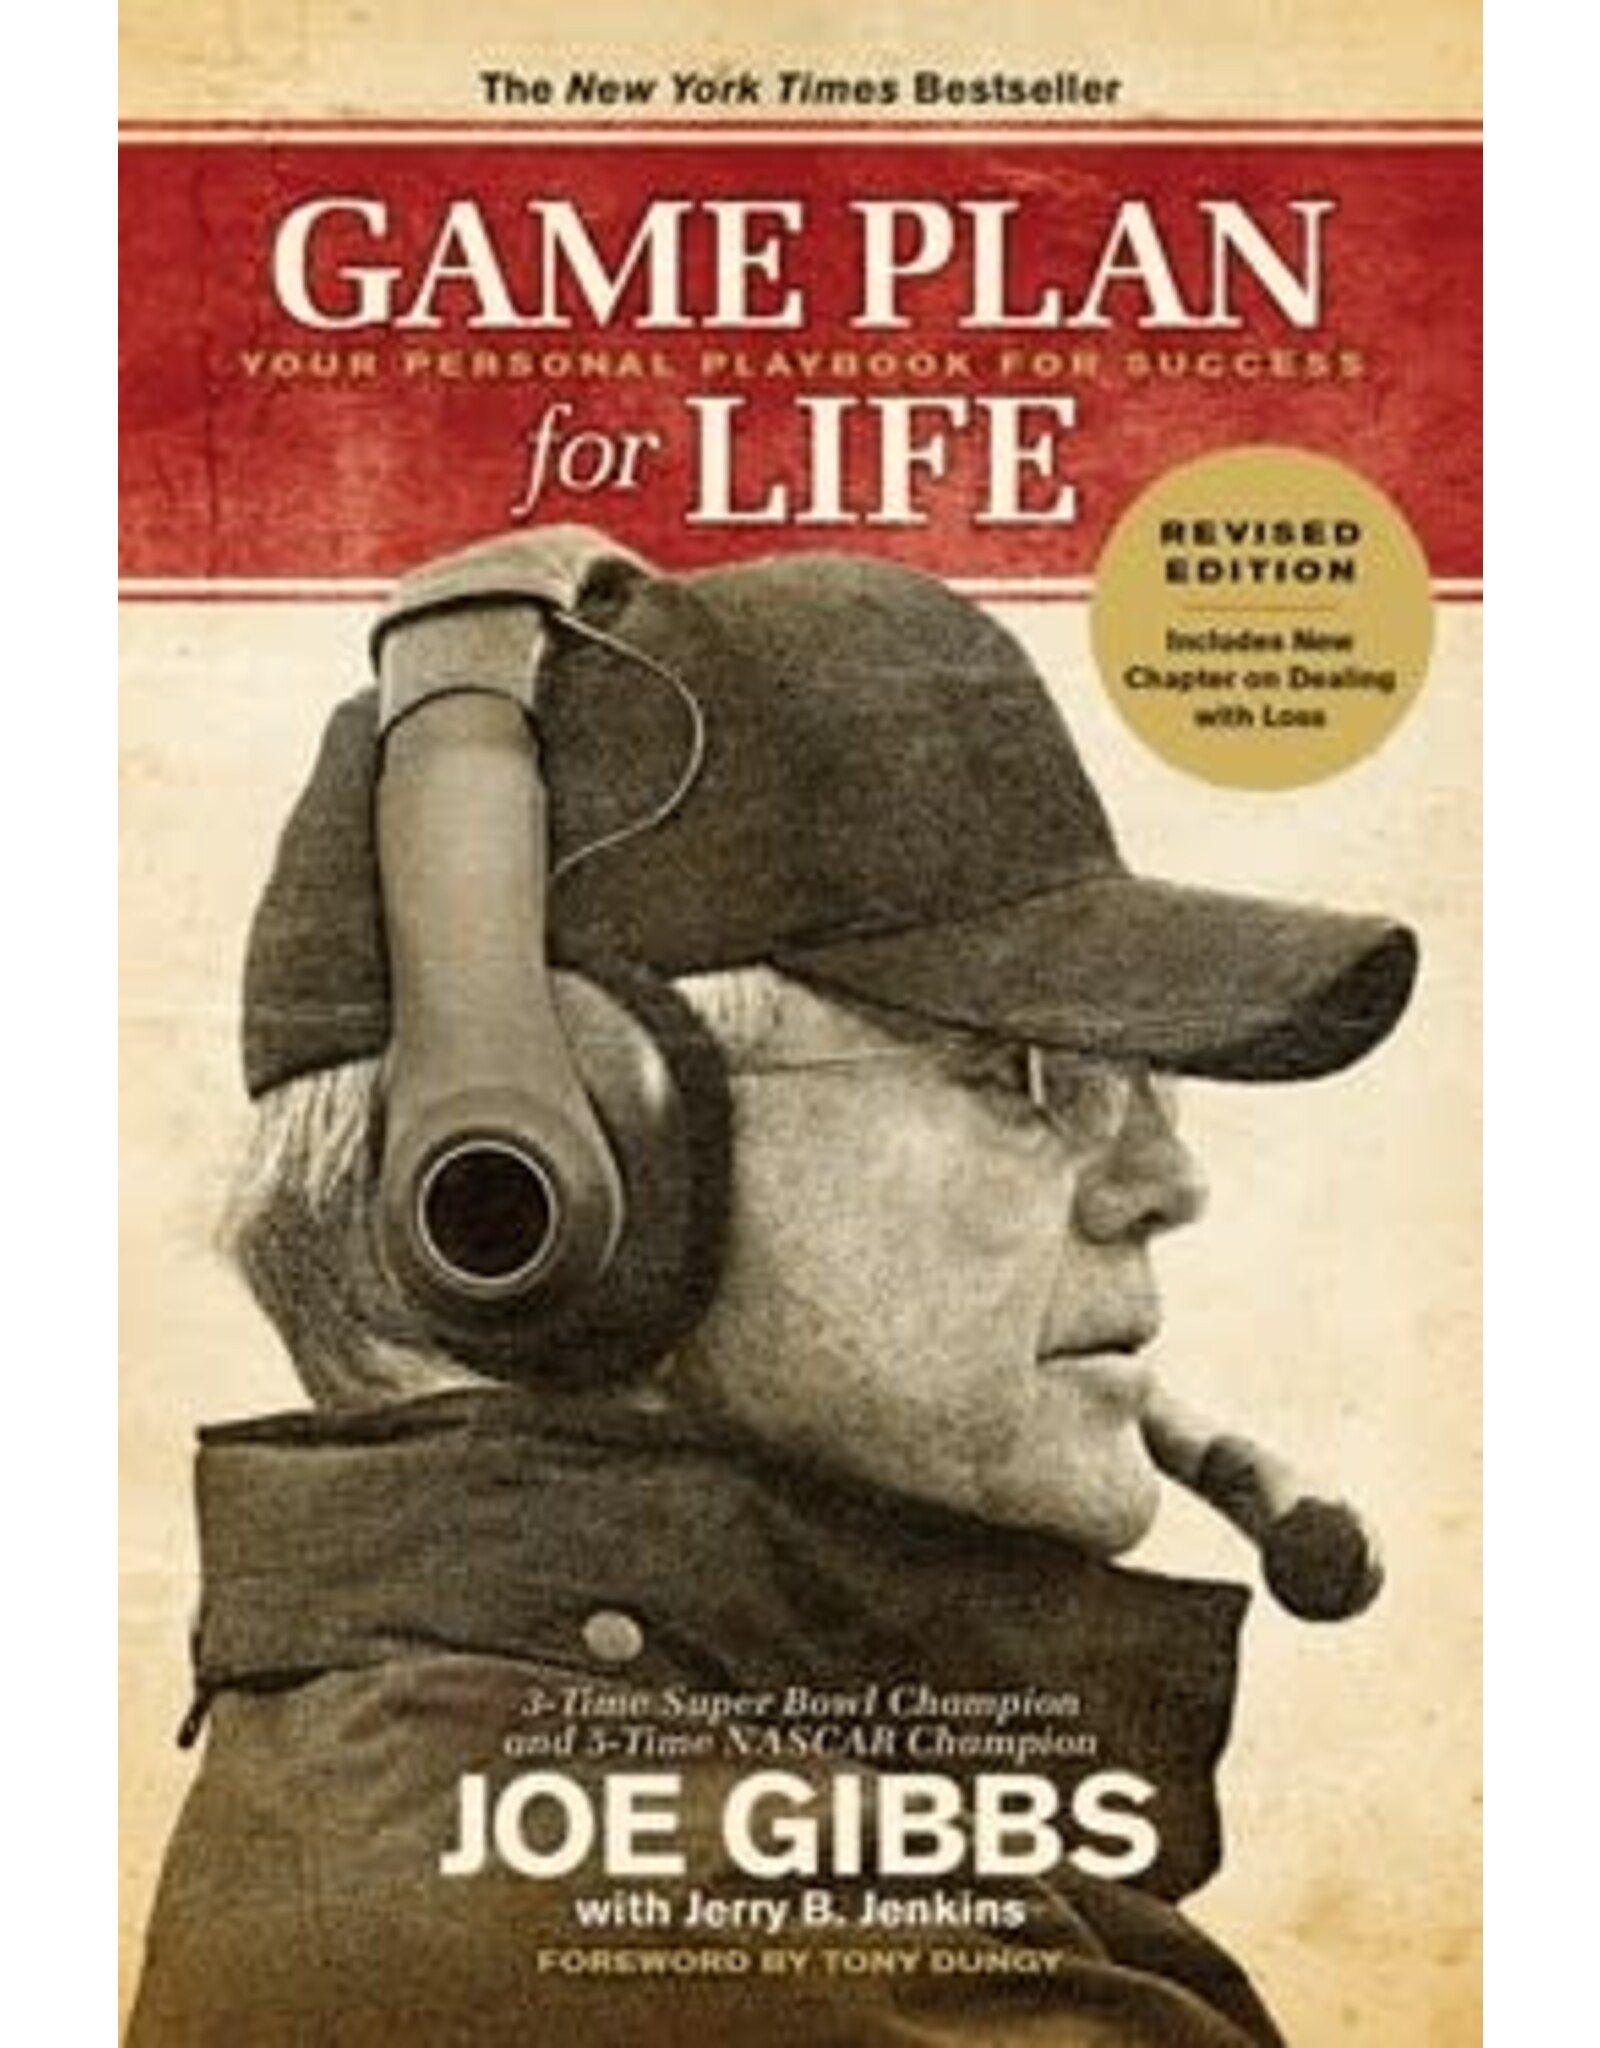 Game Plan for Life Your Personal Playbook for Success by Joe Gibbs and Jerry B. Jenkins - Soft Cover